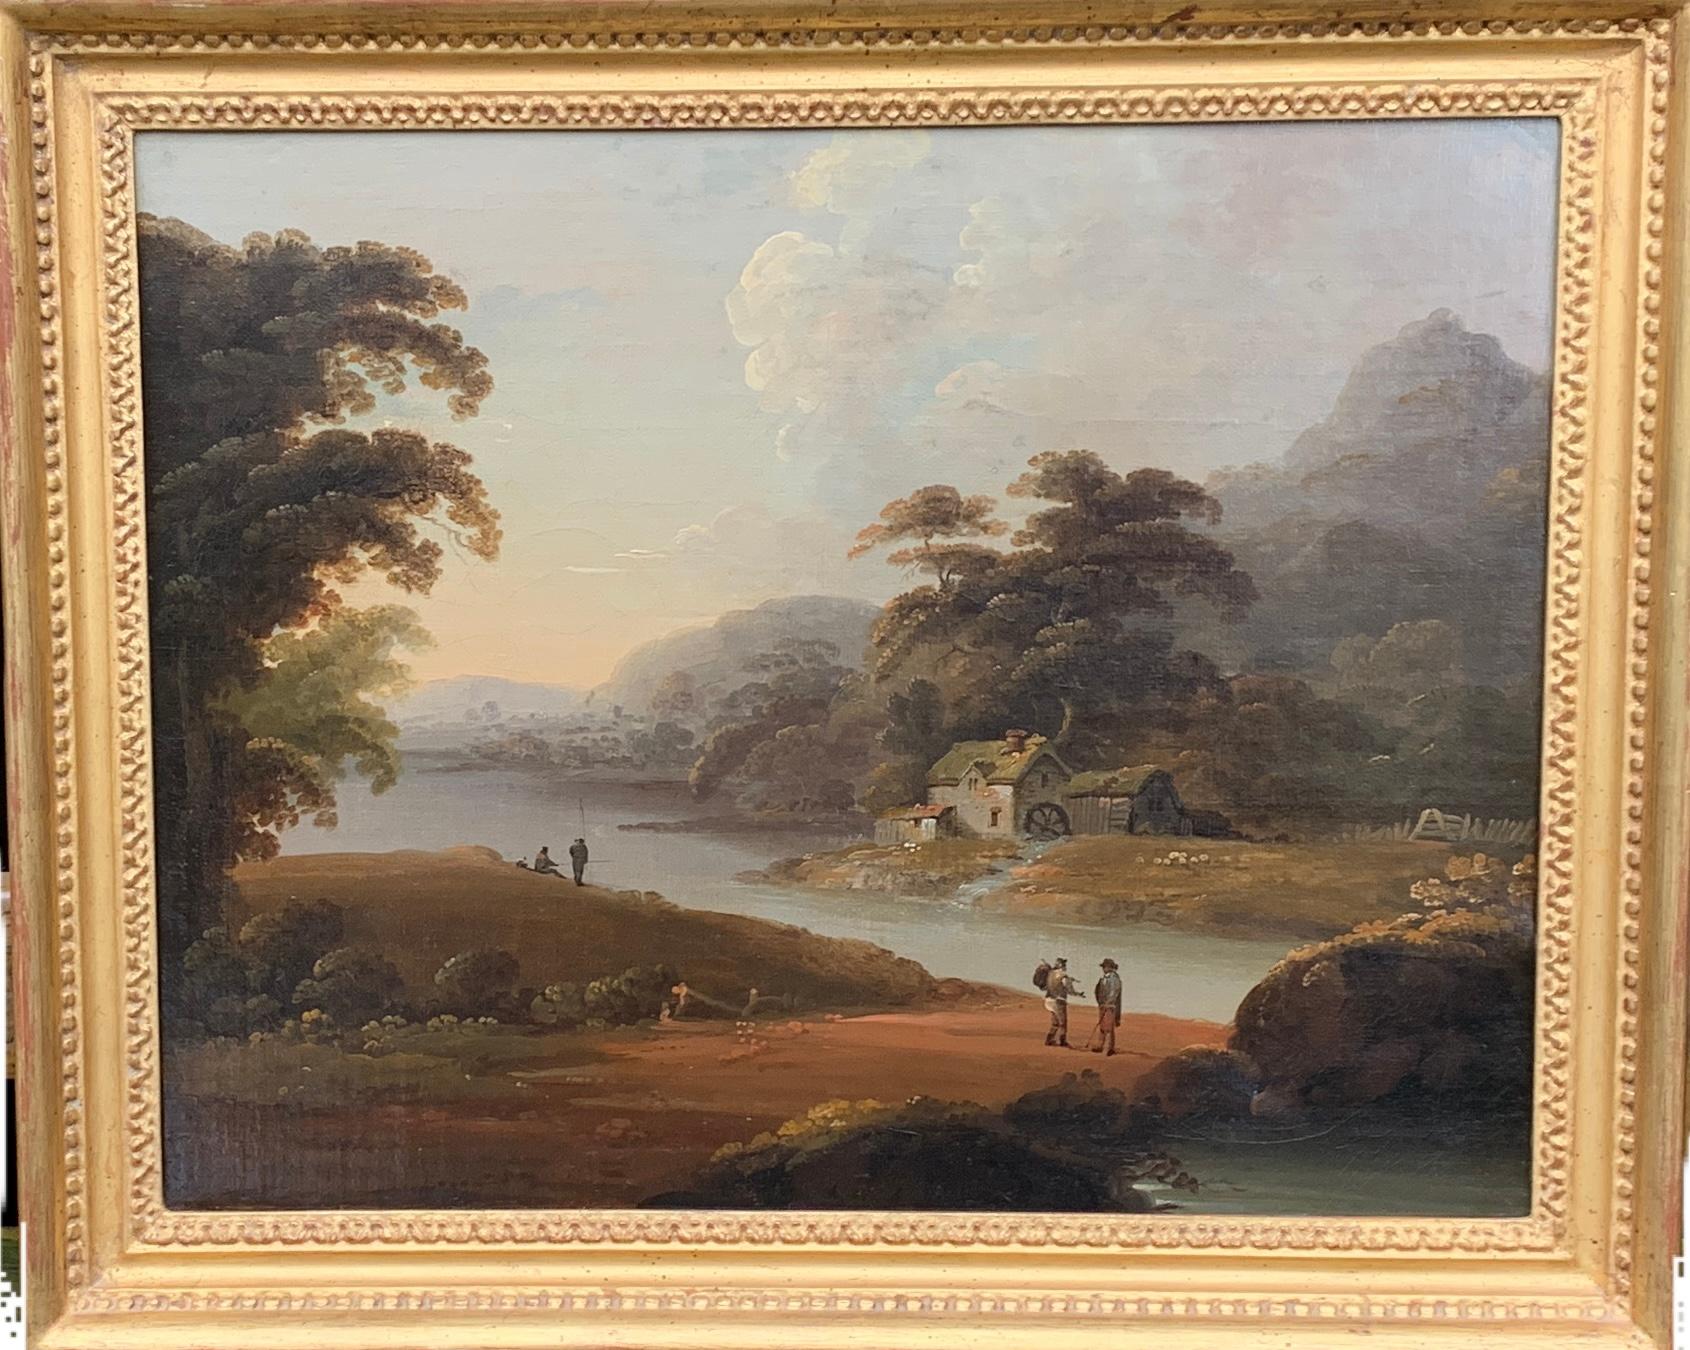 John Rathbone Figurative Painting -  18th century English oil landscape with river and figures fishing by a cottage